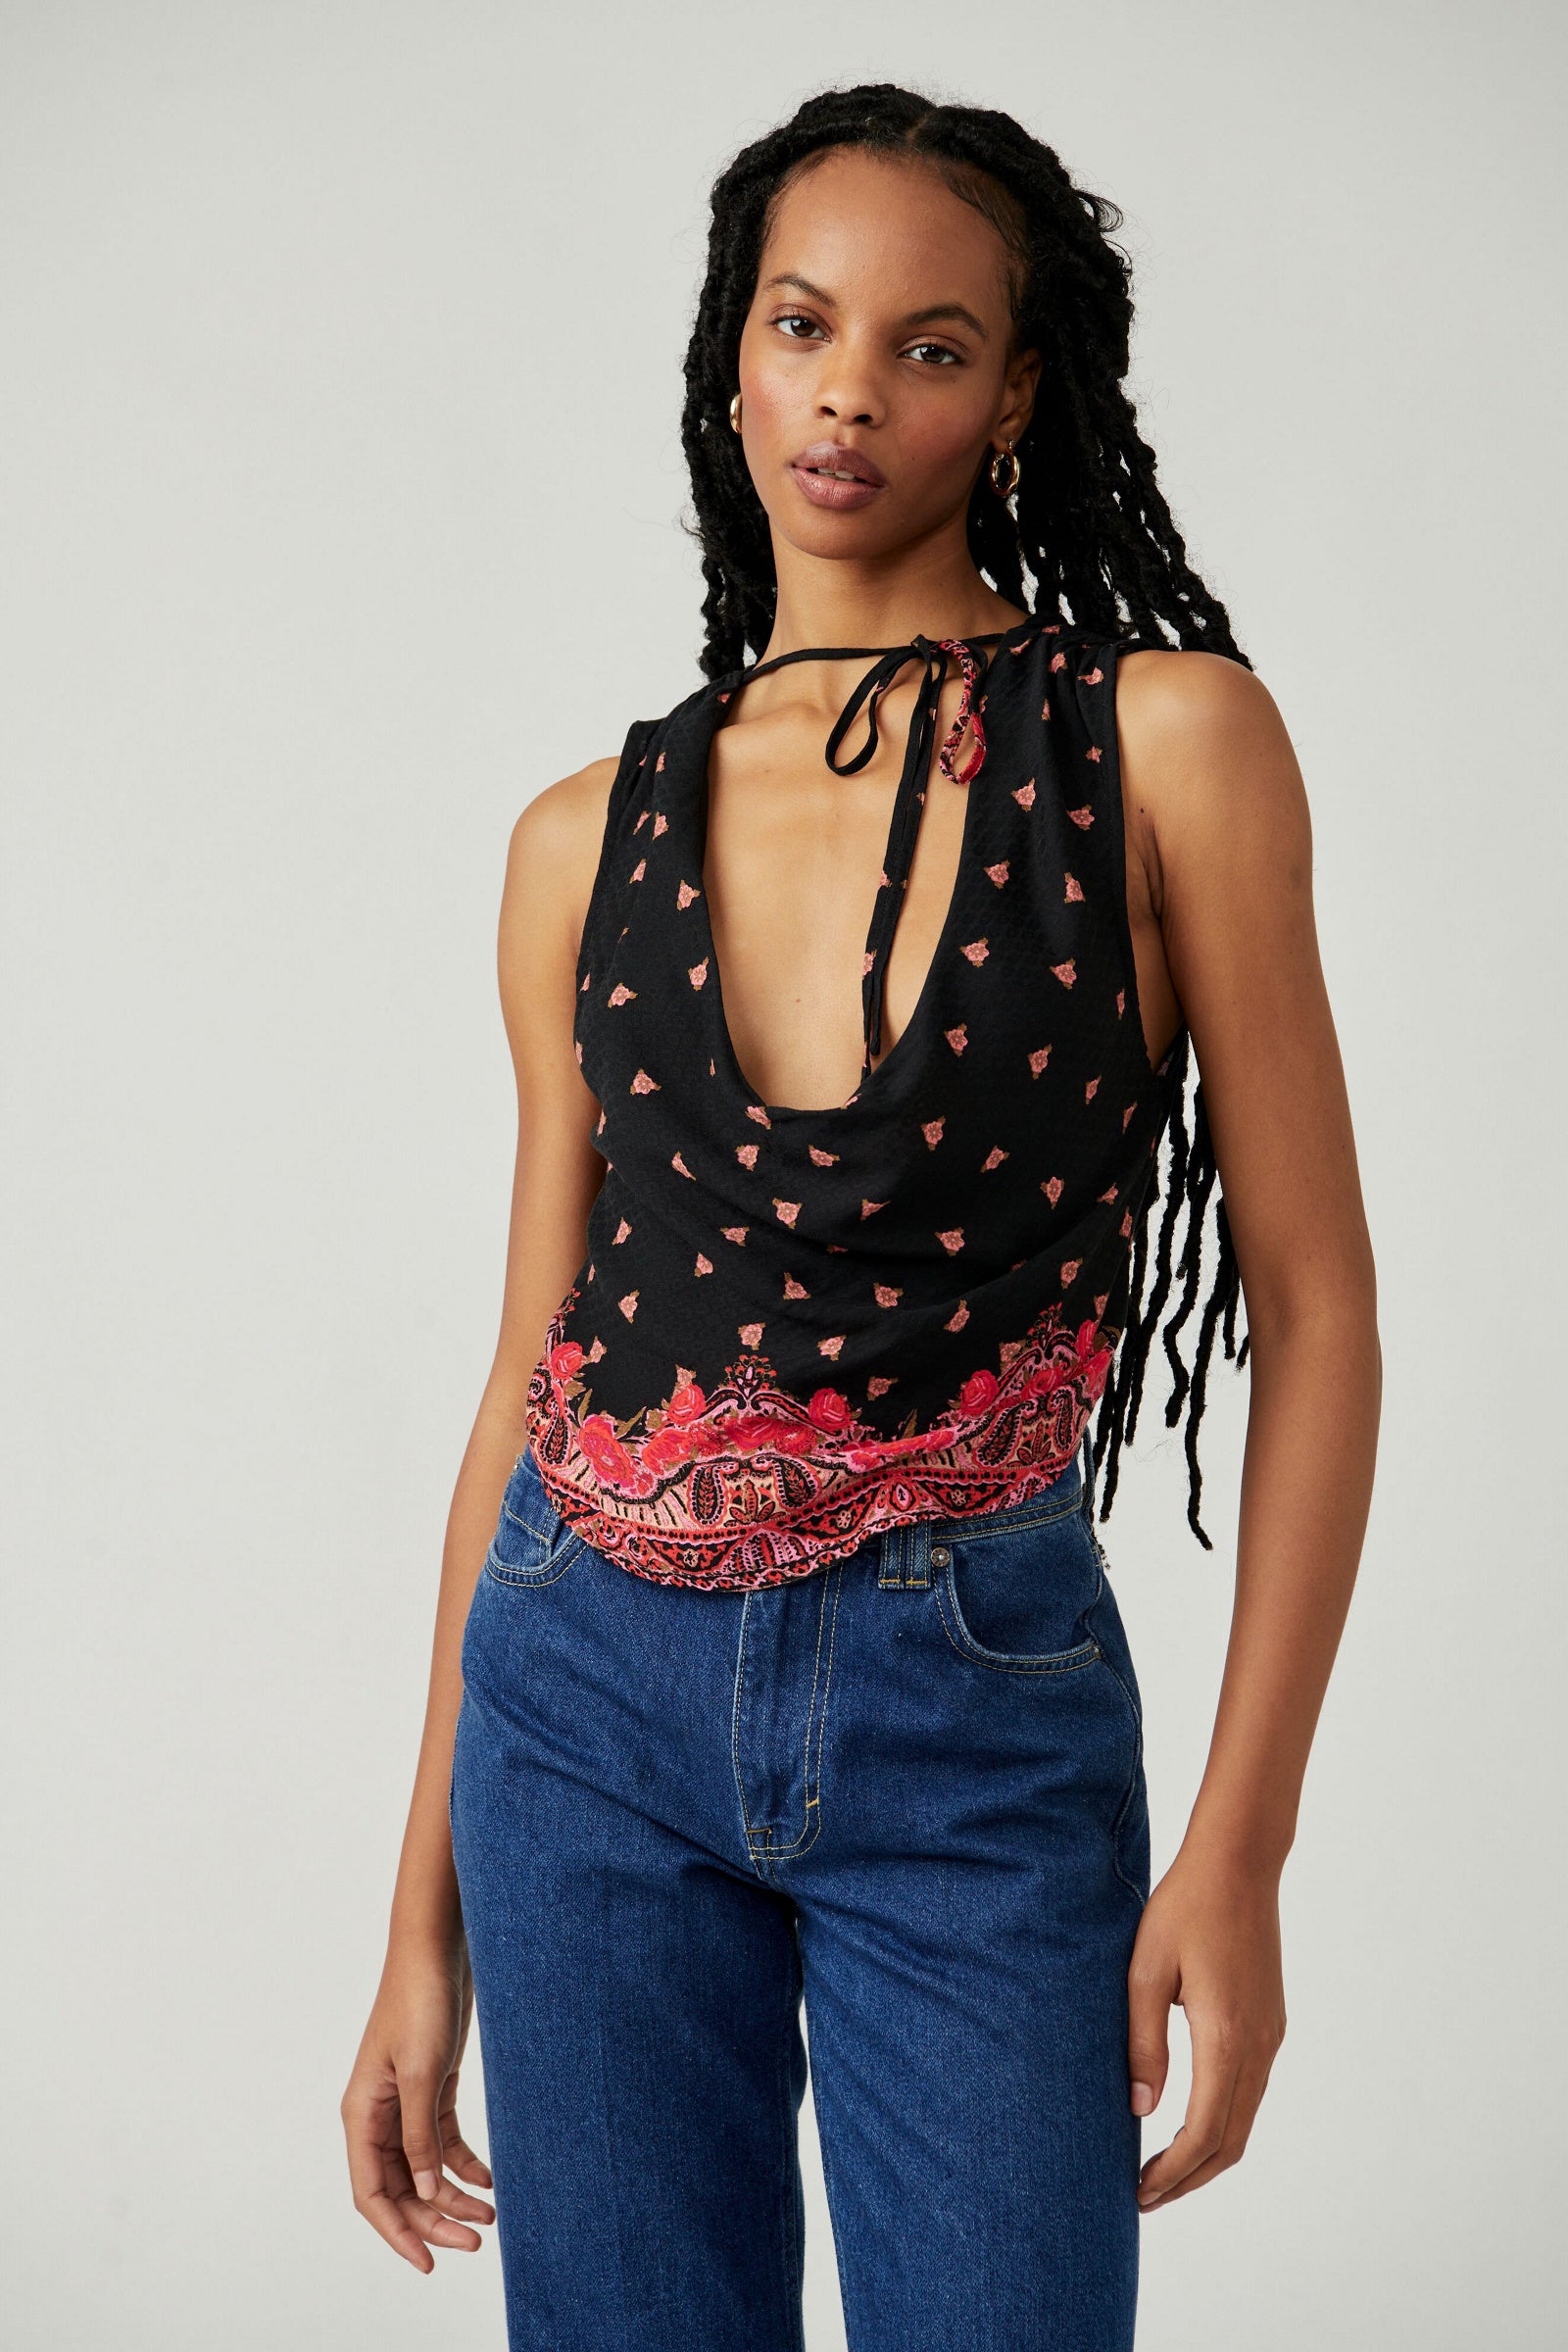 FREE PEOPLE SILAS PRINTED COWL TOP IN BLACK COMBO